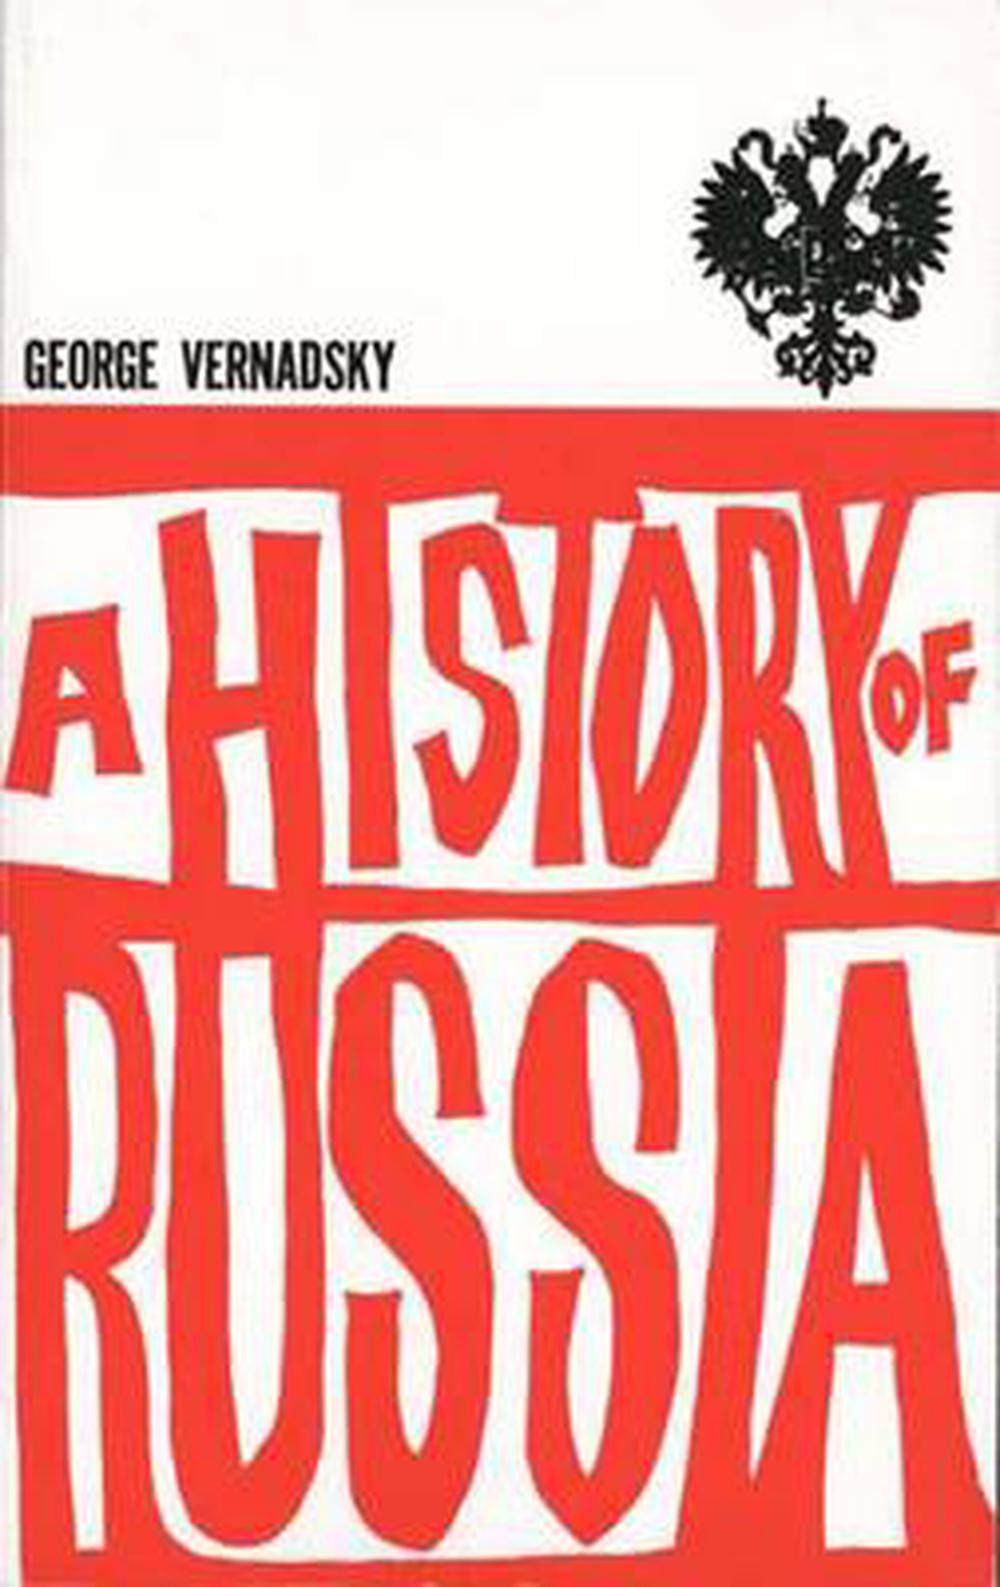 the story of russia book review